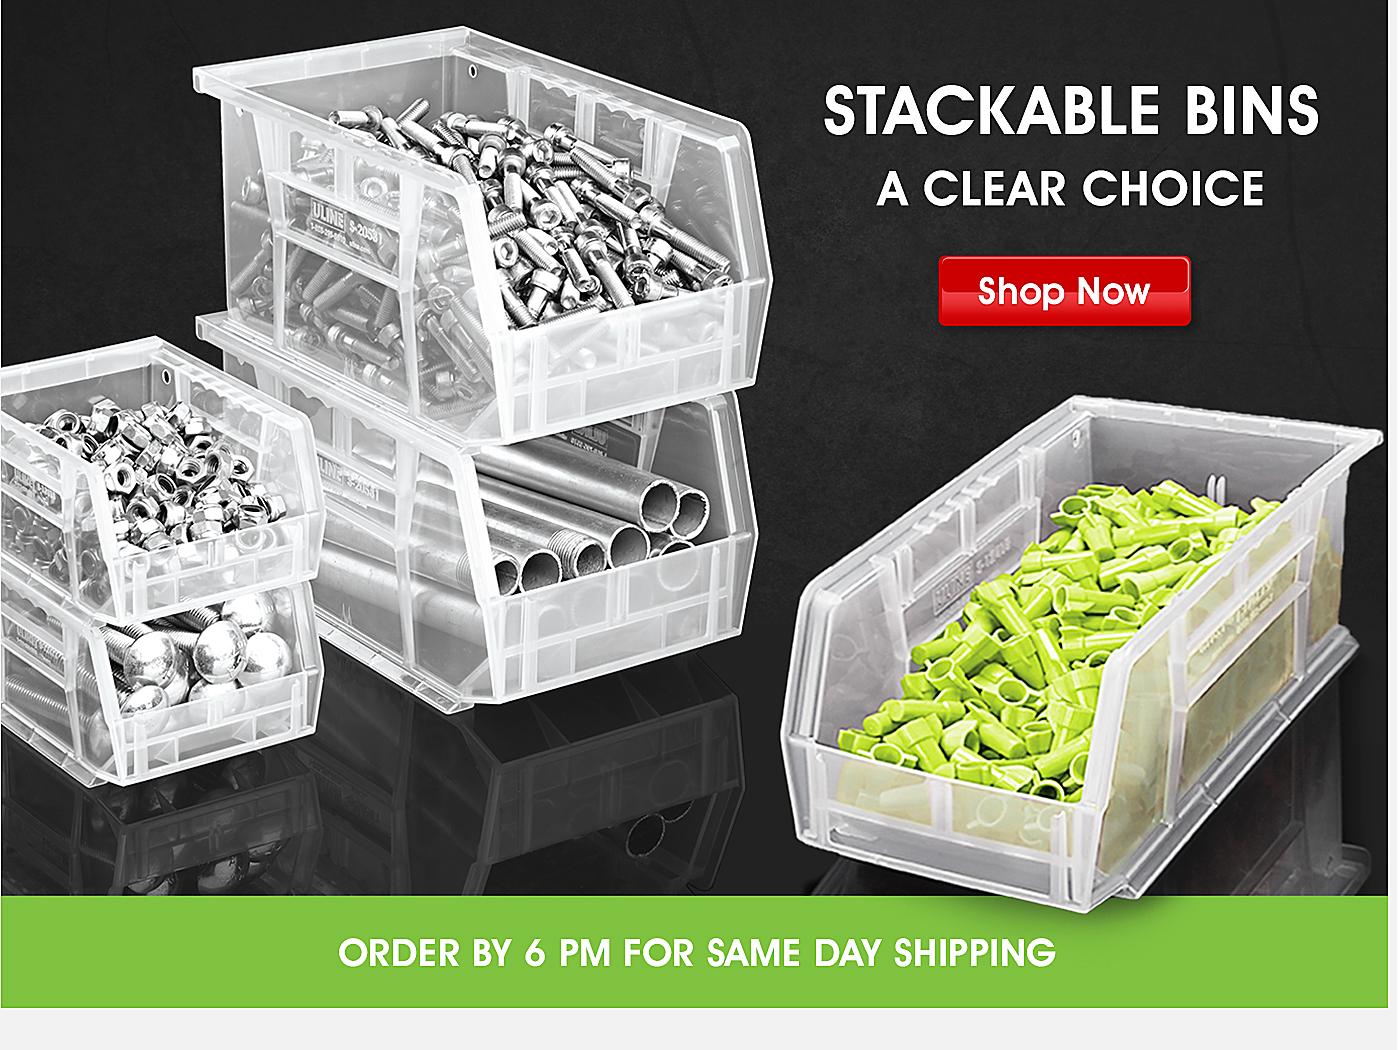  Stackable Bins. A clear choice. ORDER BY 6 PM FOR SAME DAY SHIPPING